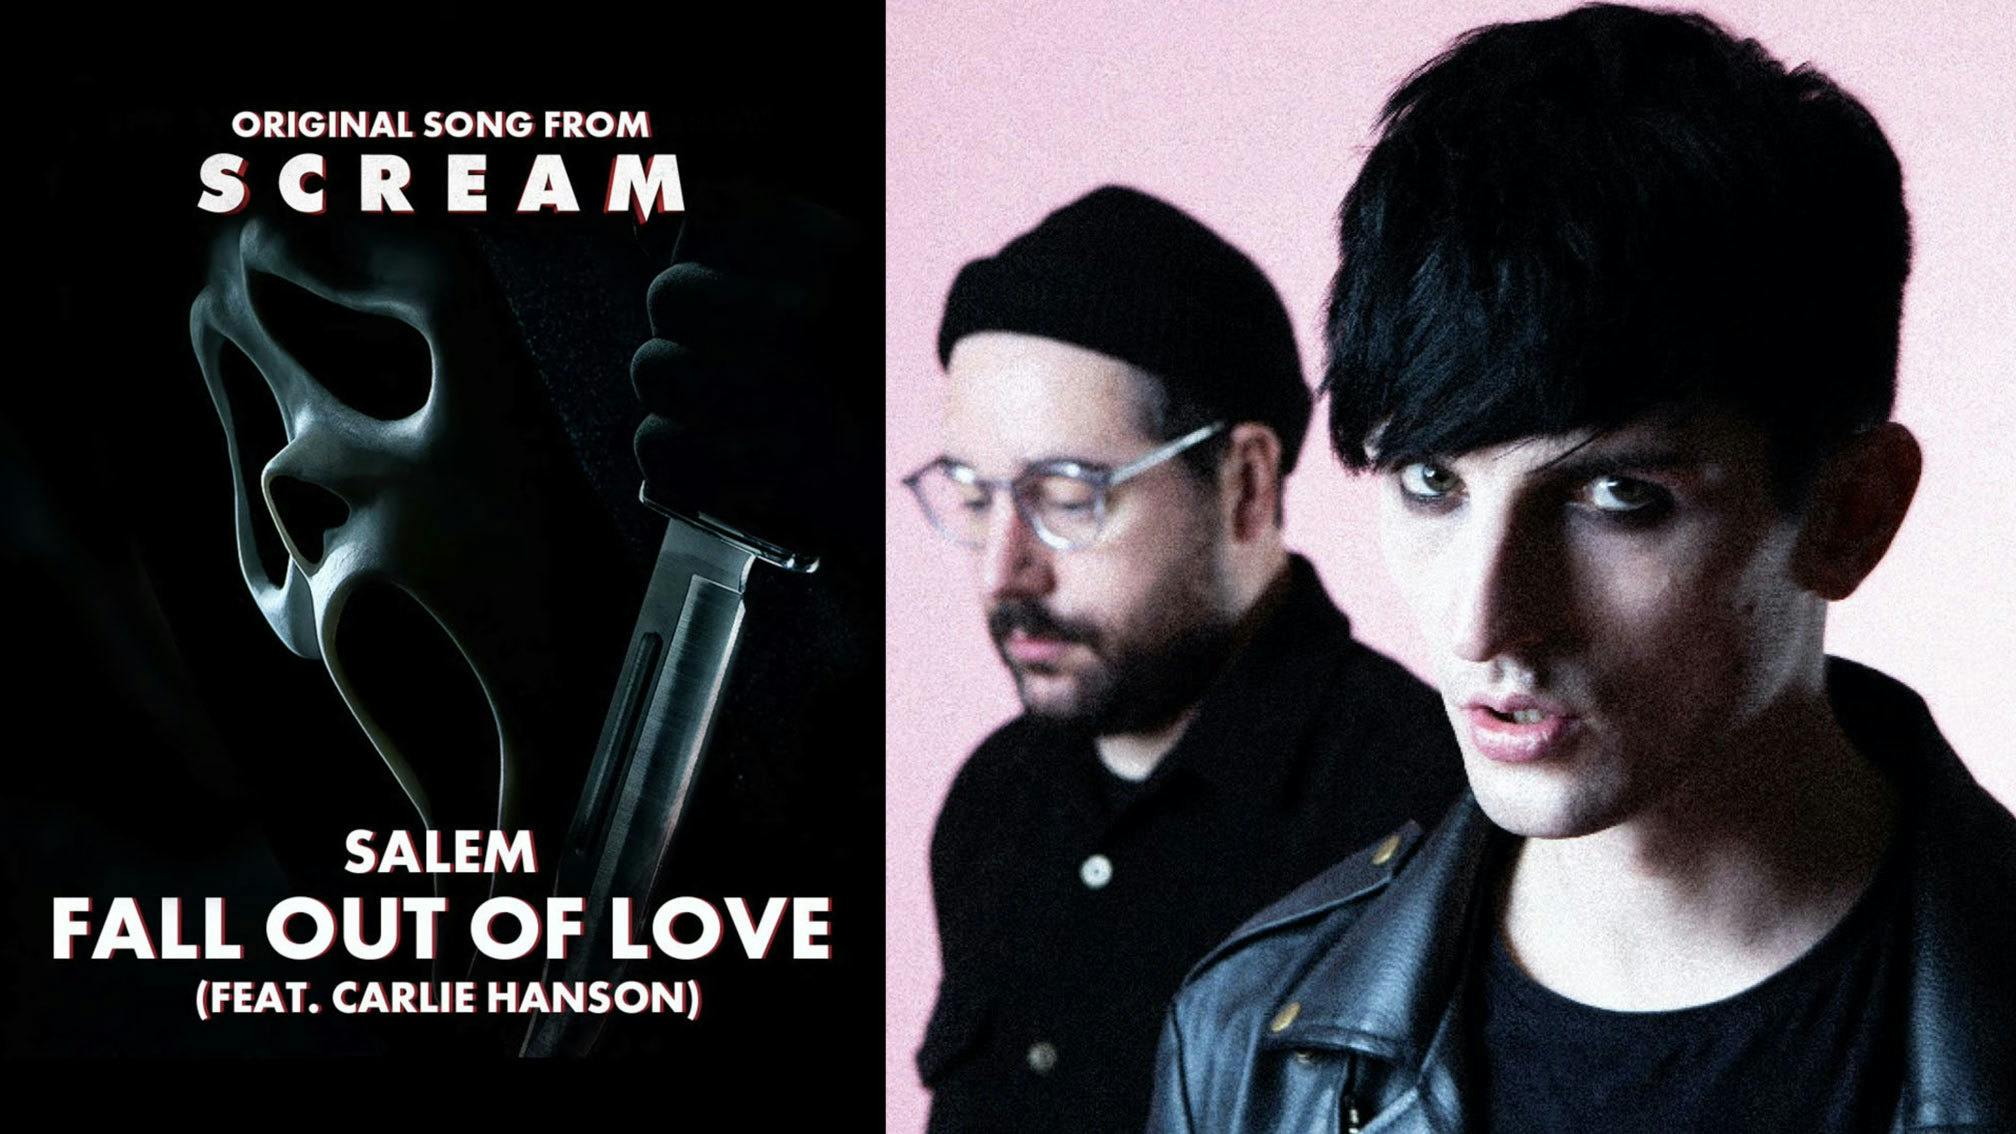 Salem release Fall Out Of Love featuring Carlie Hanson, from the Scream soundtrack